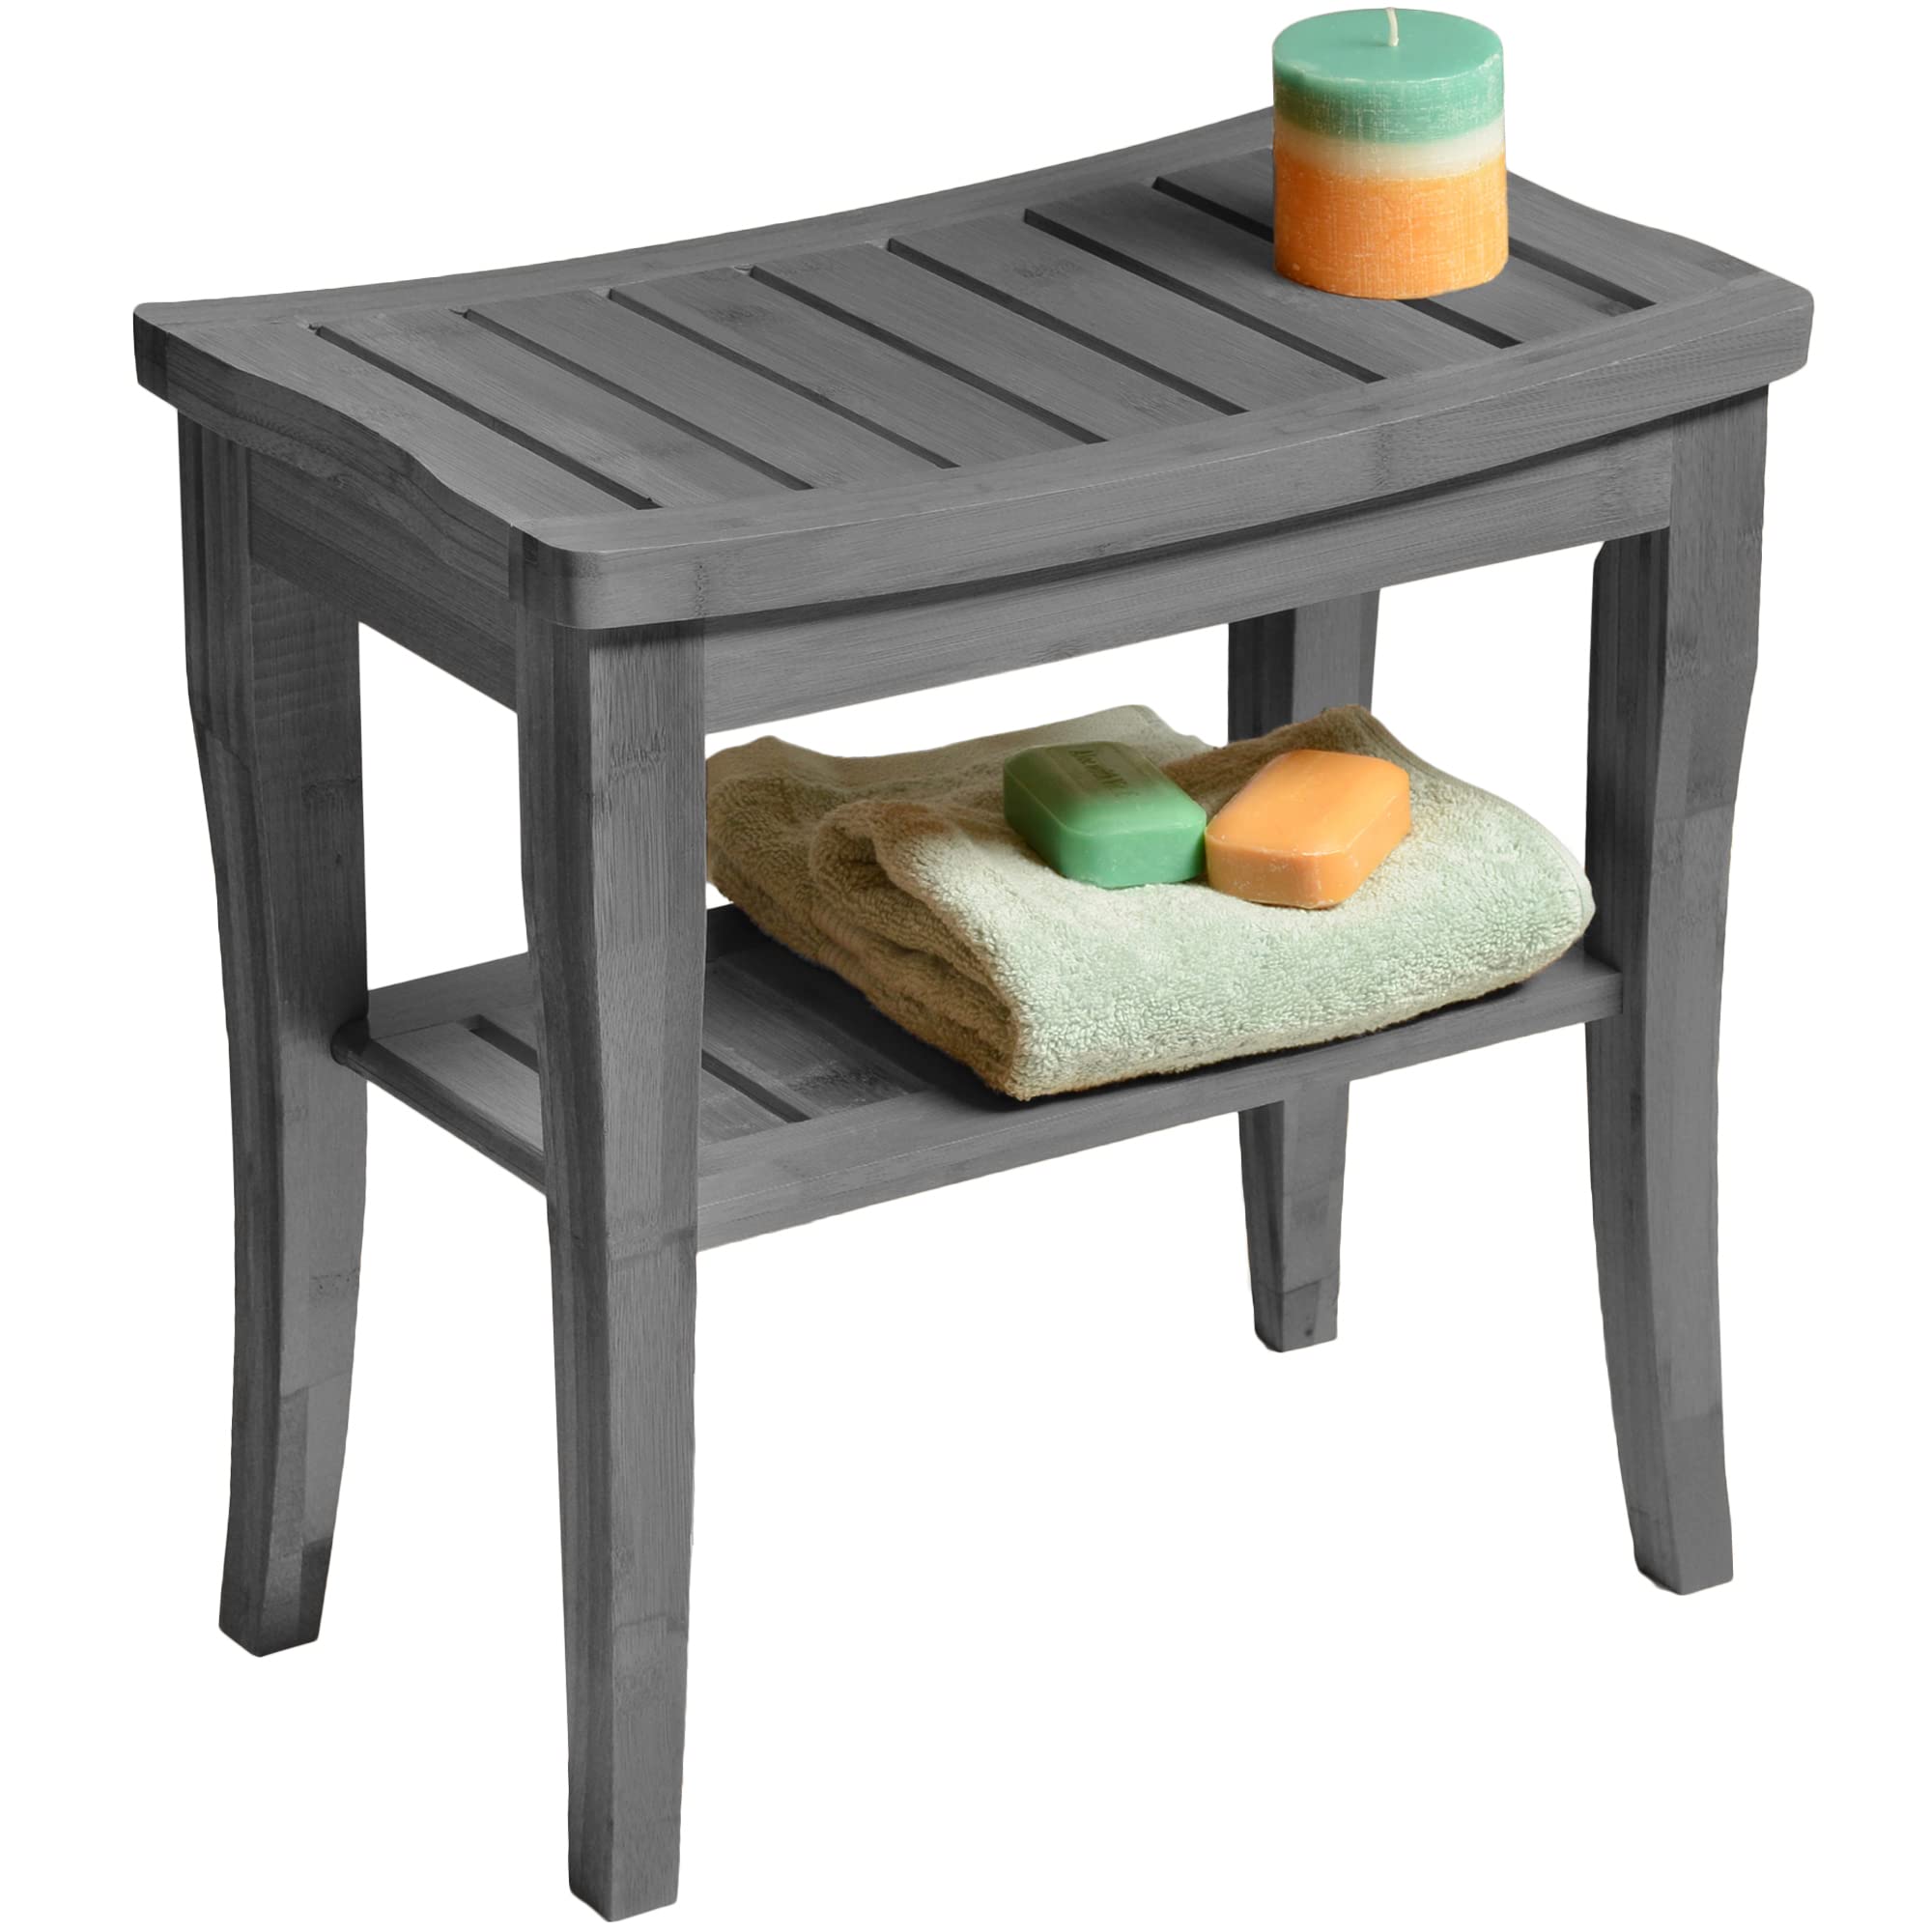 Bamboo Shower Bench Spa Stool - Wood 2-Tier Seat, Foot Rest Shaving Stool with Non-Slip Feet + Storage Shelf - Seat or Organizer for Bathroom, Living Room, Bedroom and Garden D�cor (Grey)  - Like New